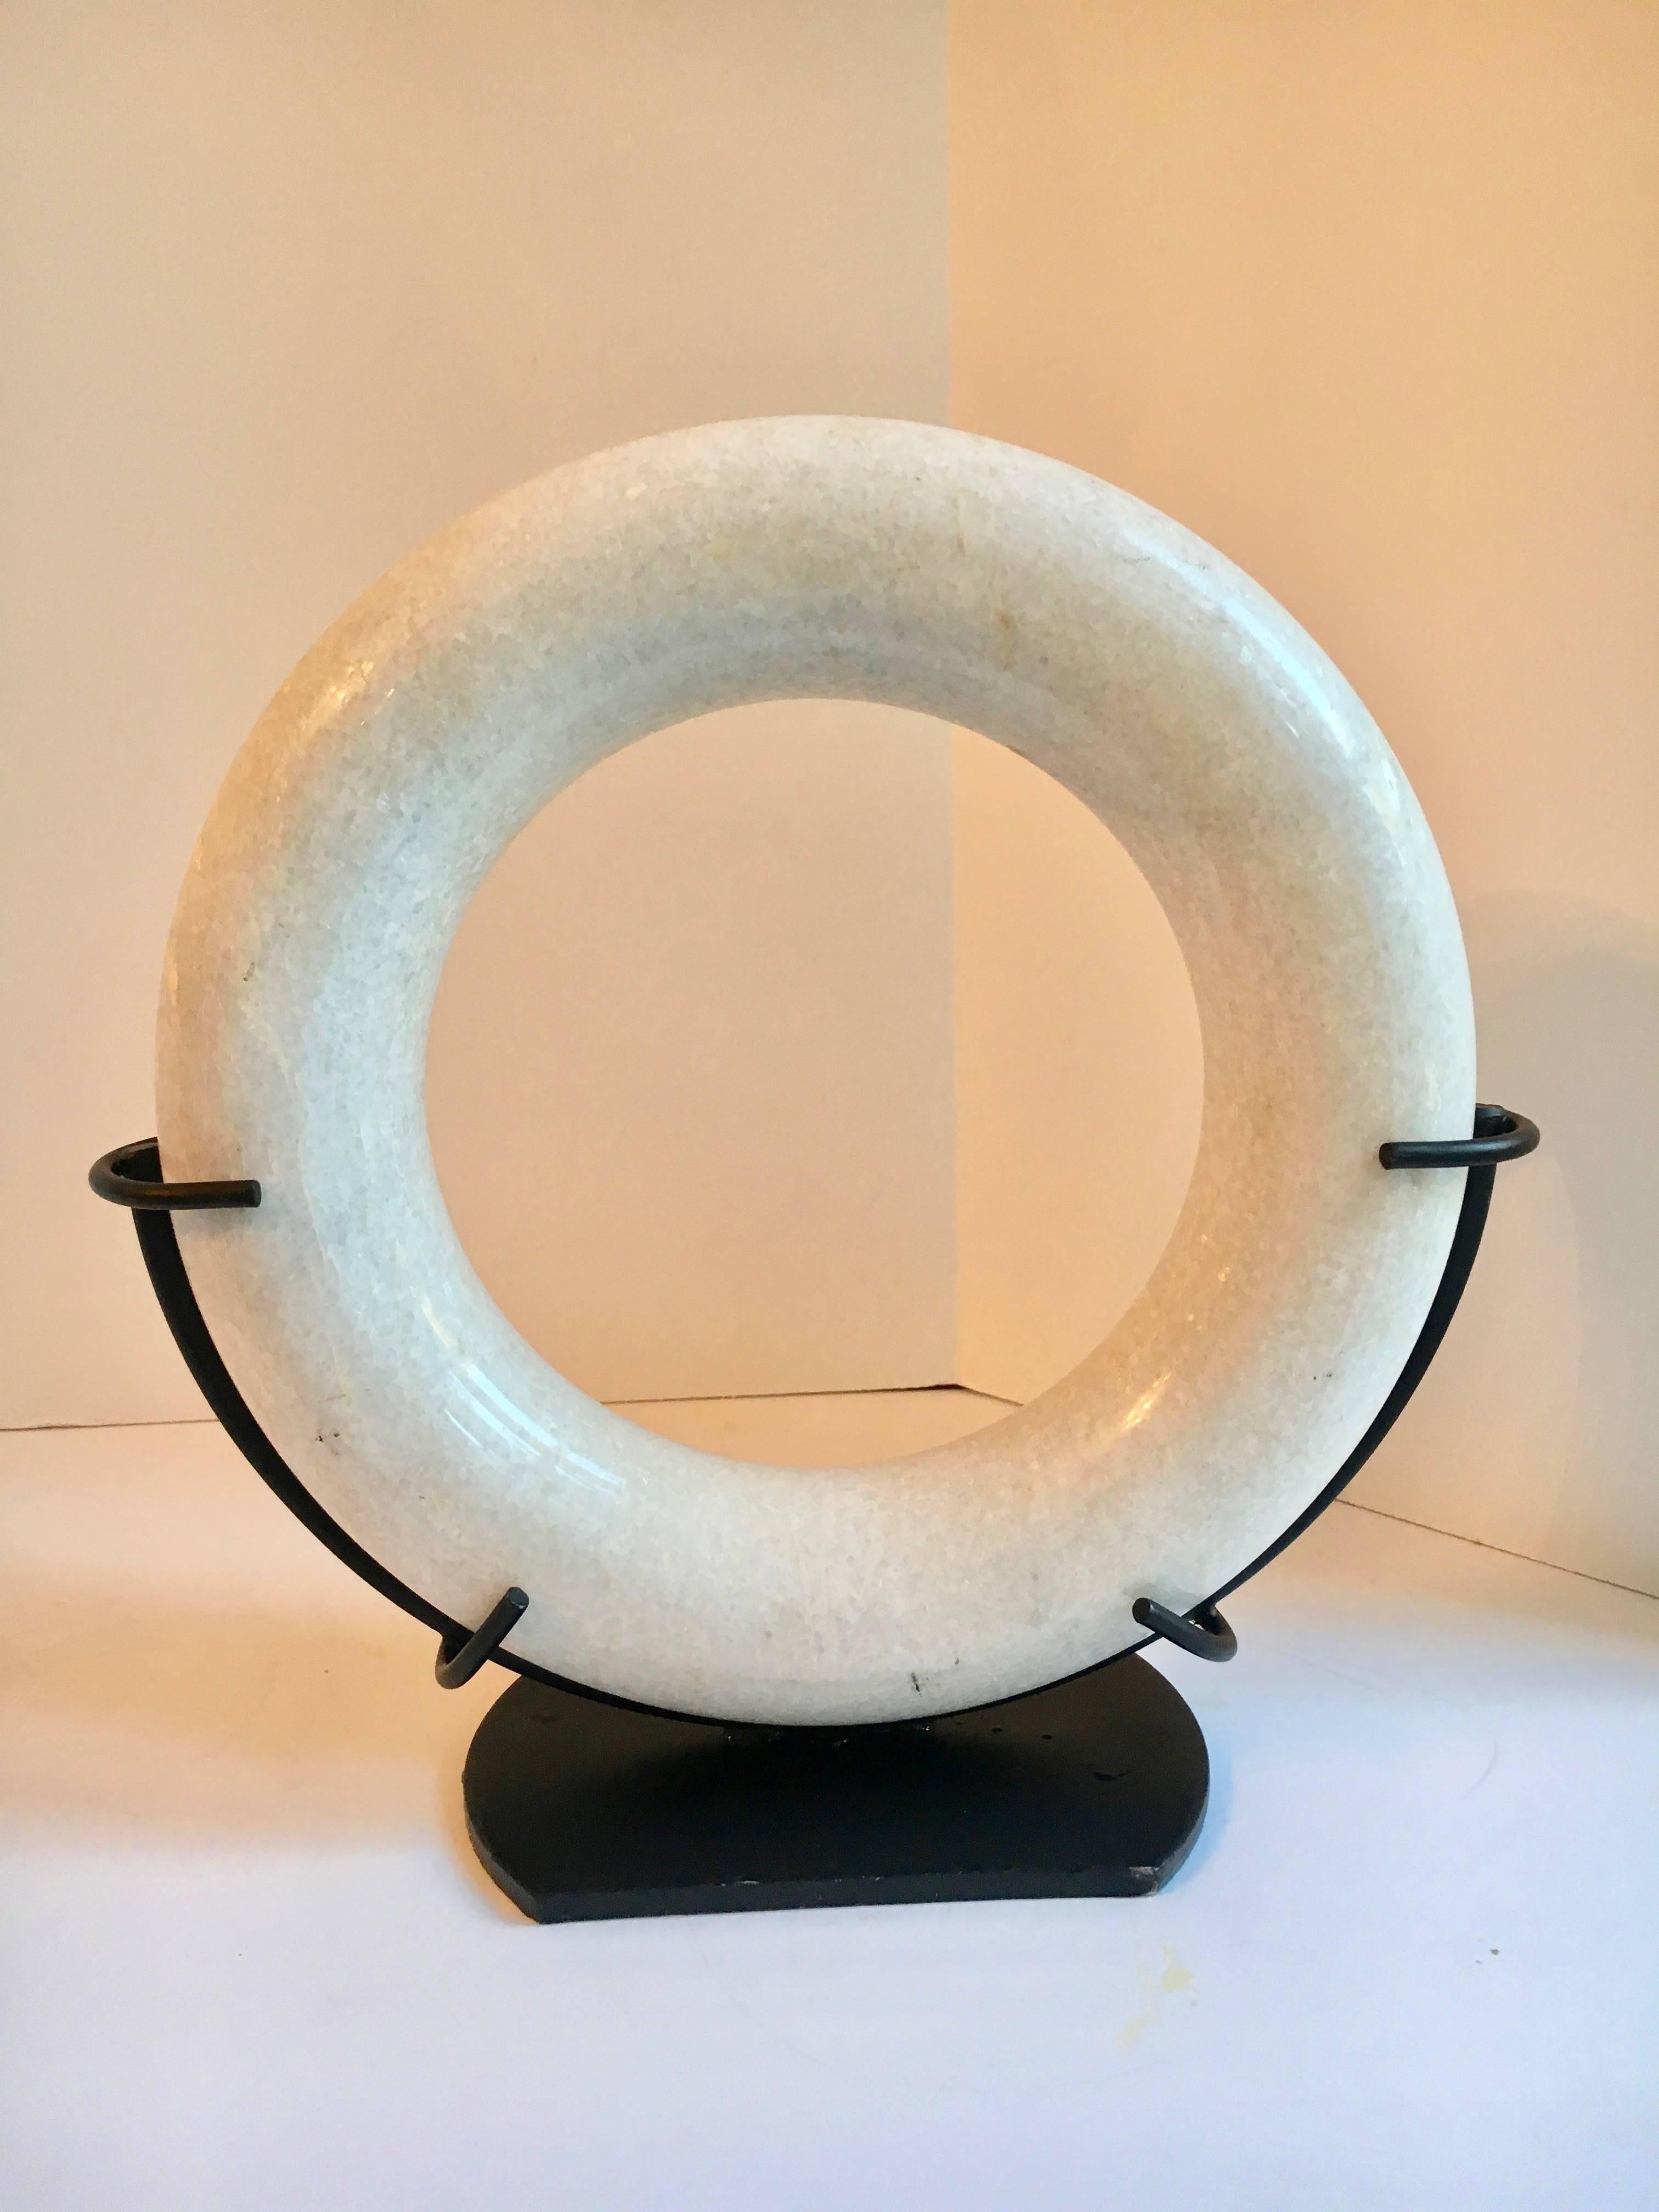 Marble circular disk sculpture in custom metal stand - a custom piece perfect for any room or shelf.
 